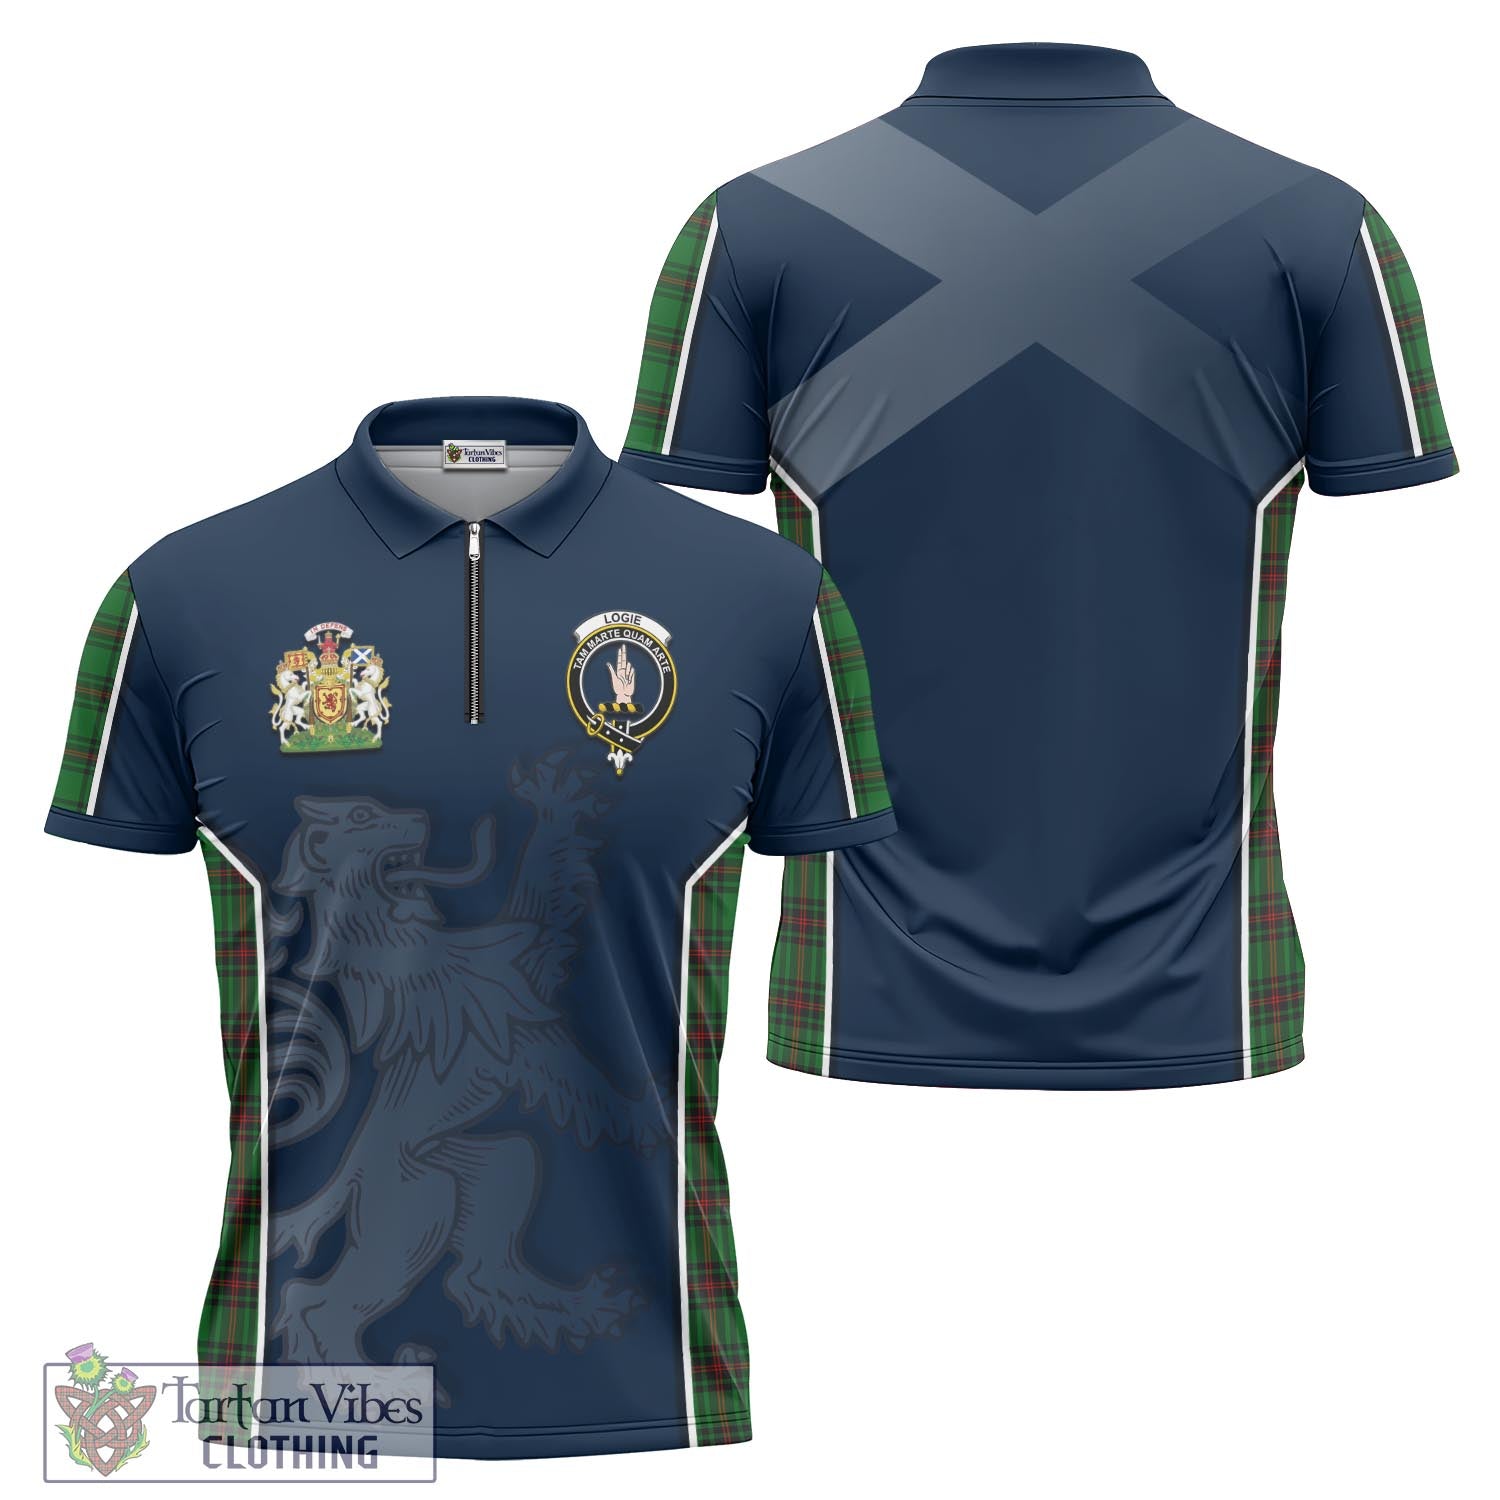 Tartan Vibes Clothing Logie Tartan Zipper Polo Shirt with Family Crest and Lion Rampant Vibes Sport Style